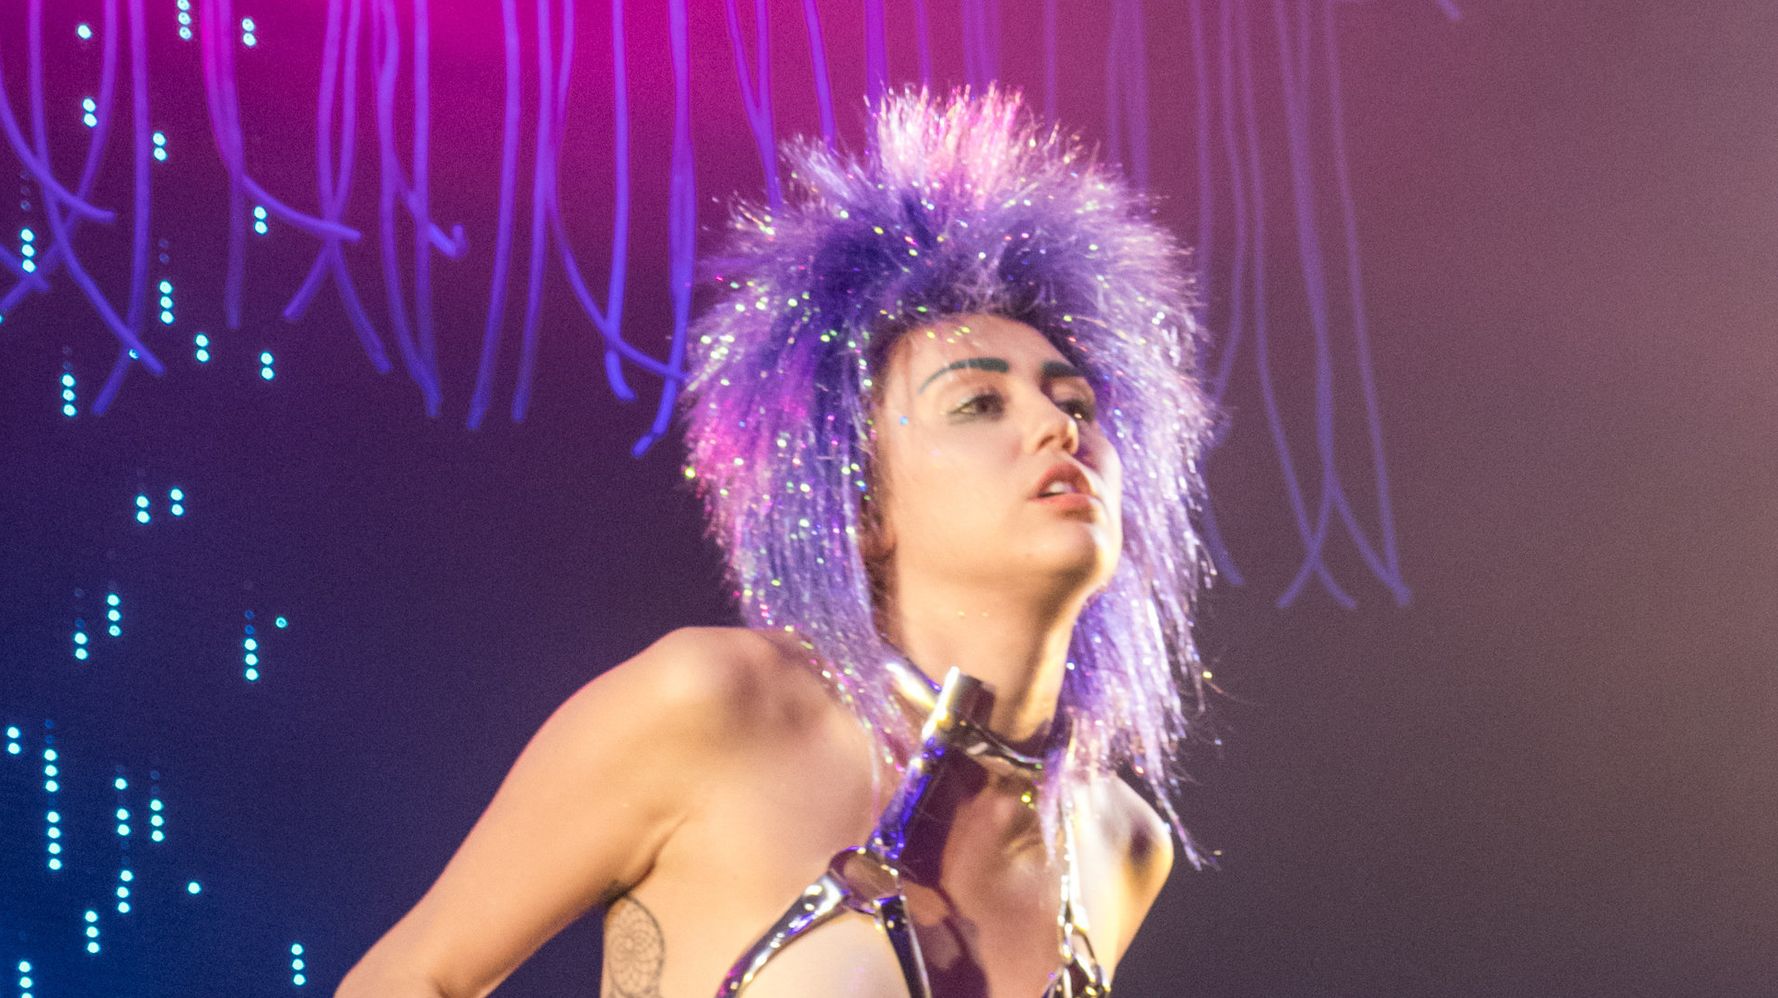 Miley Cyrus Wears Her Most Outrageous NSFW Outfit Yet.